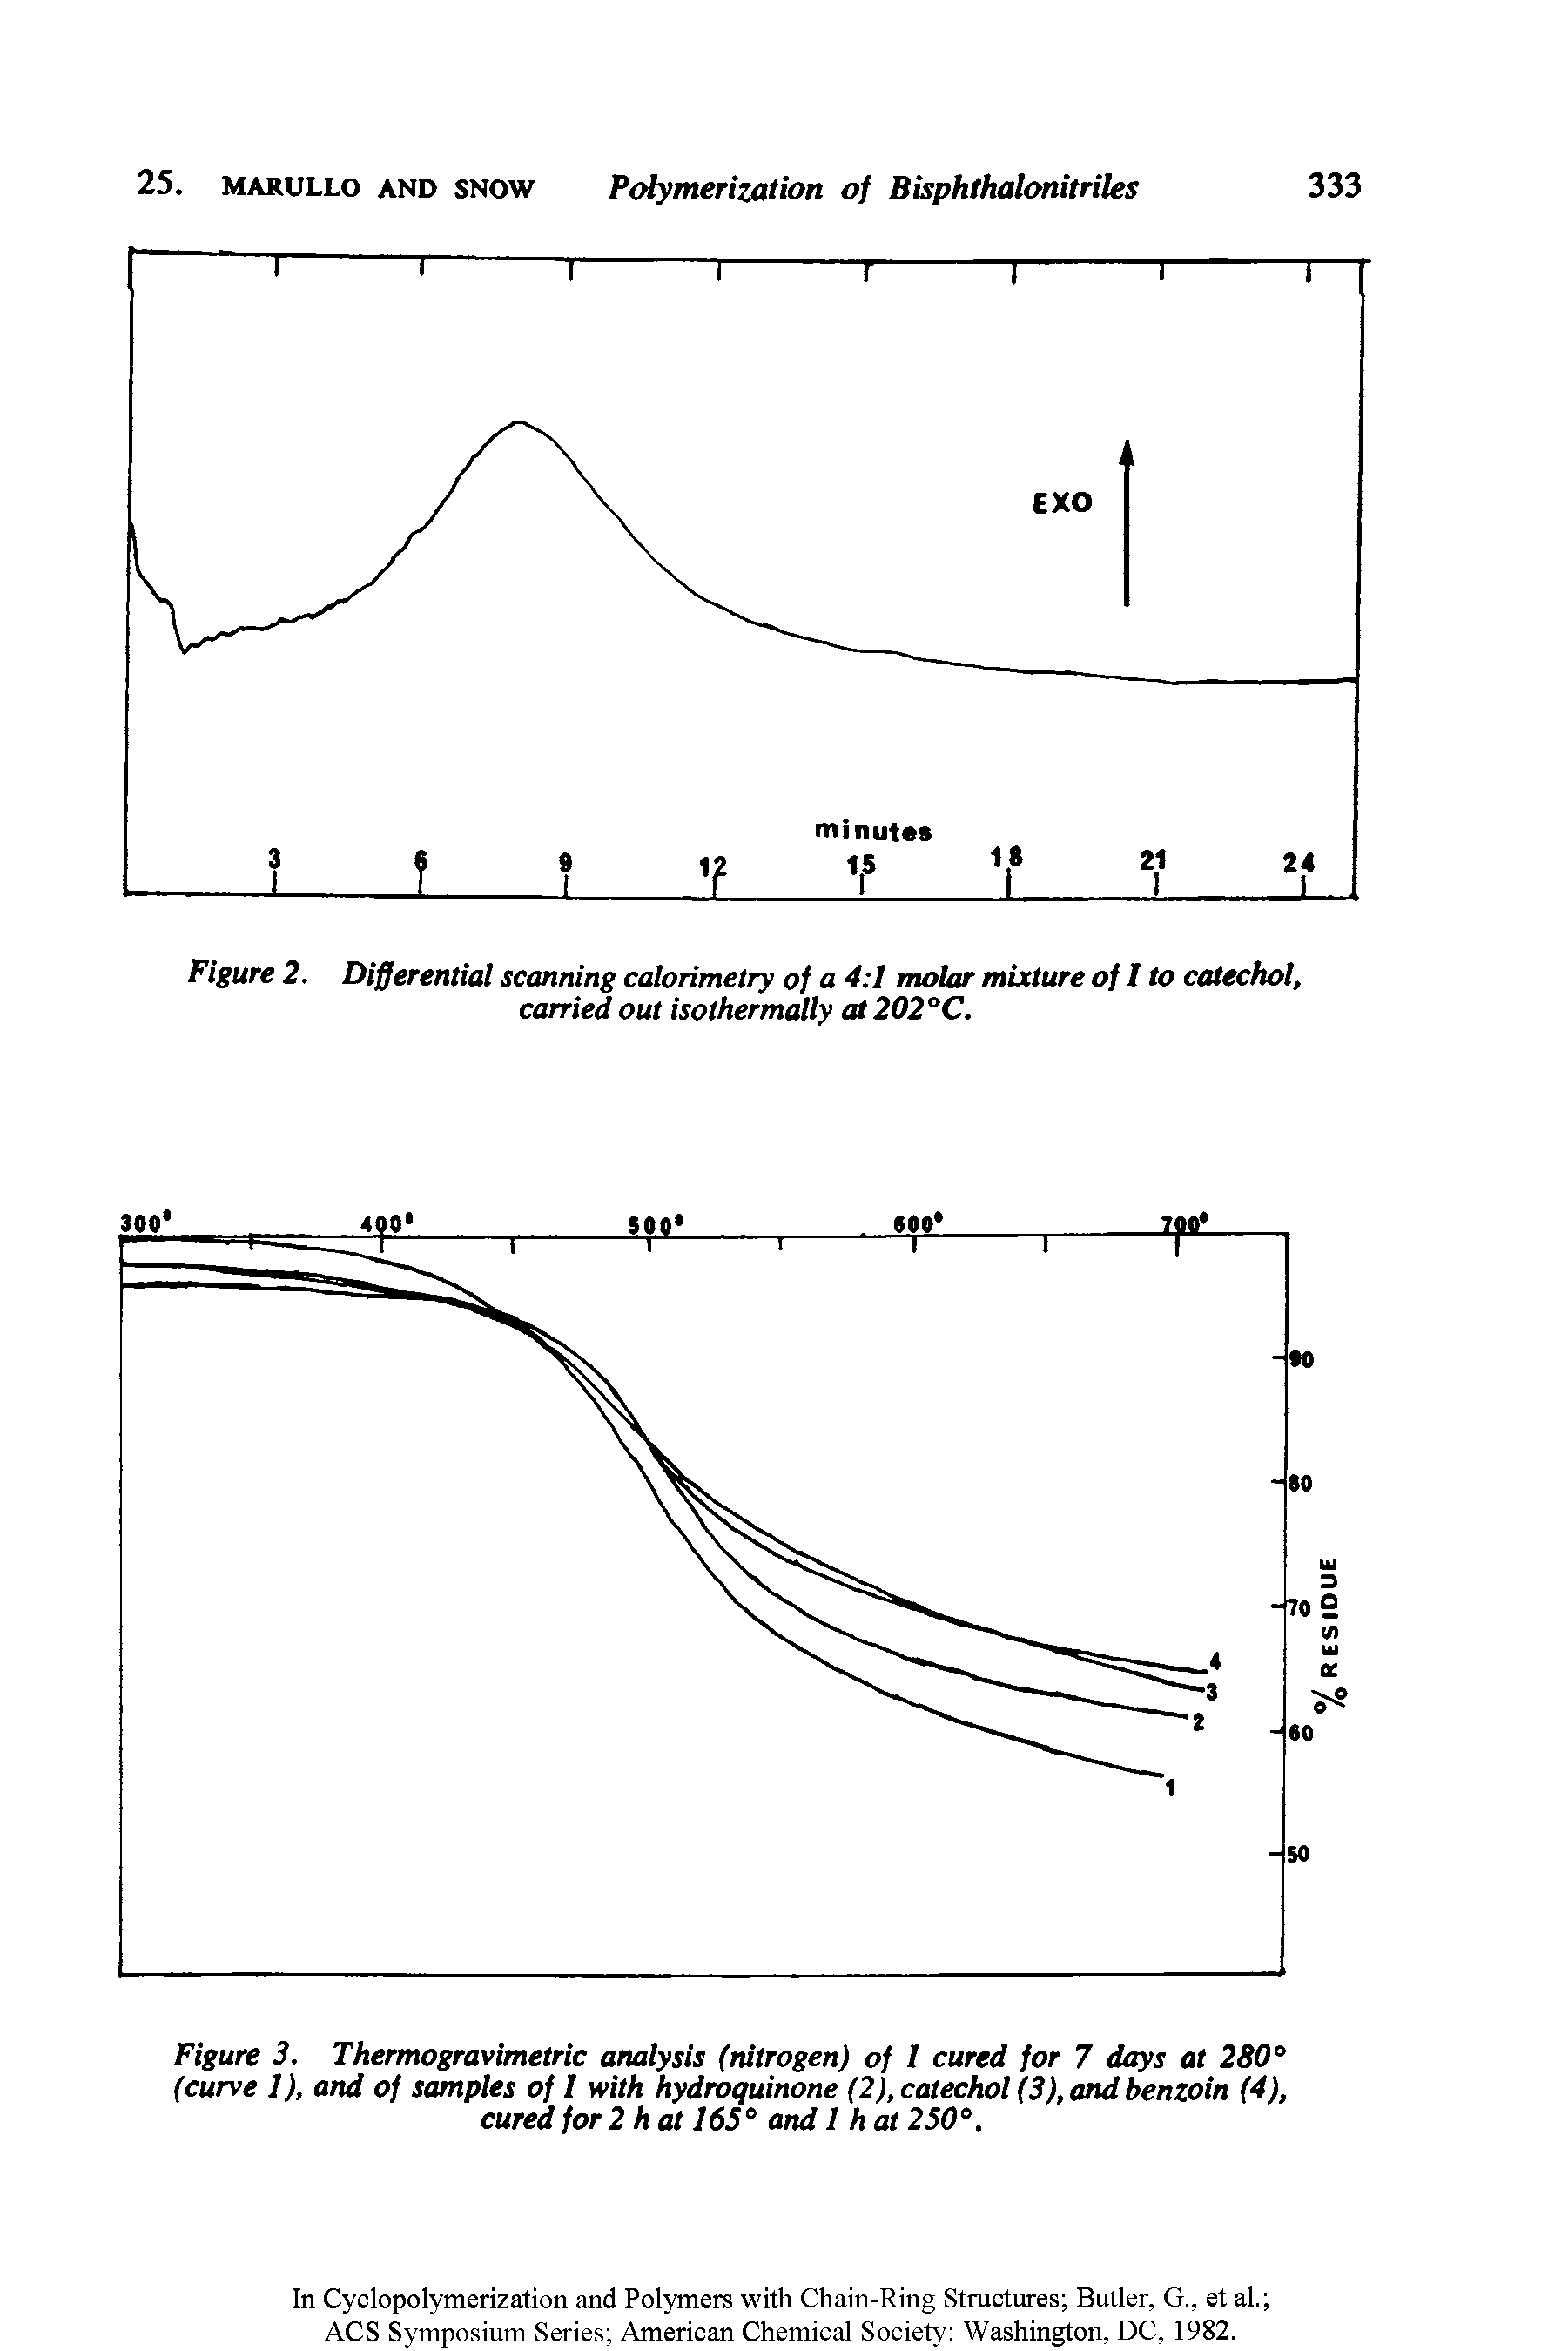 Figure 3. Thermogravimetric analysis (nitrogen) of 1 cured for 7 days at 280° (curve 1), and of samples of l with hydroquinone (2), catechol (3), and benzoin (4), cured for 2 hat 1650 and 1 hat 250°.